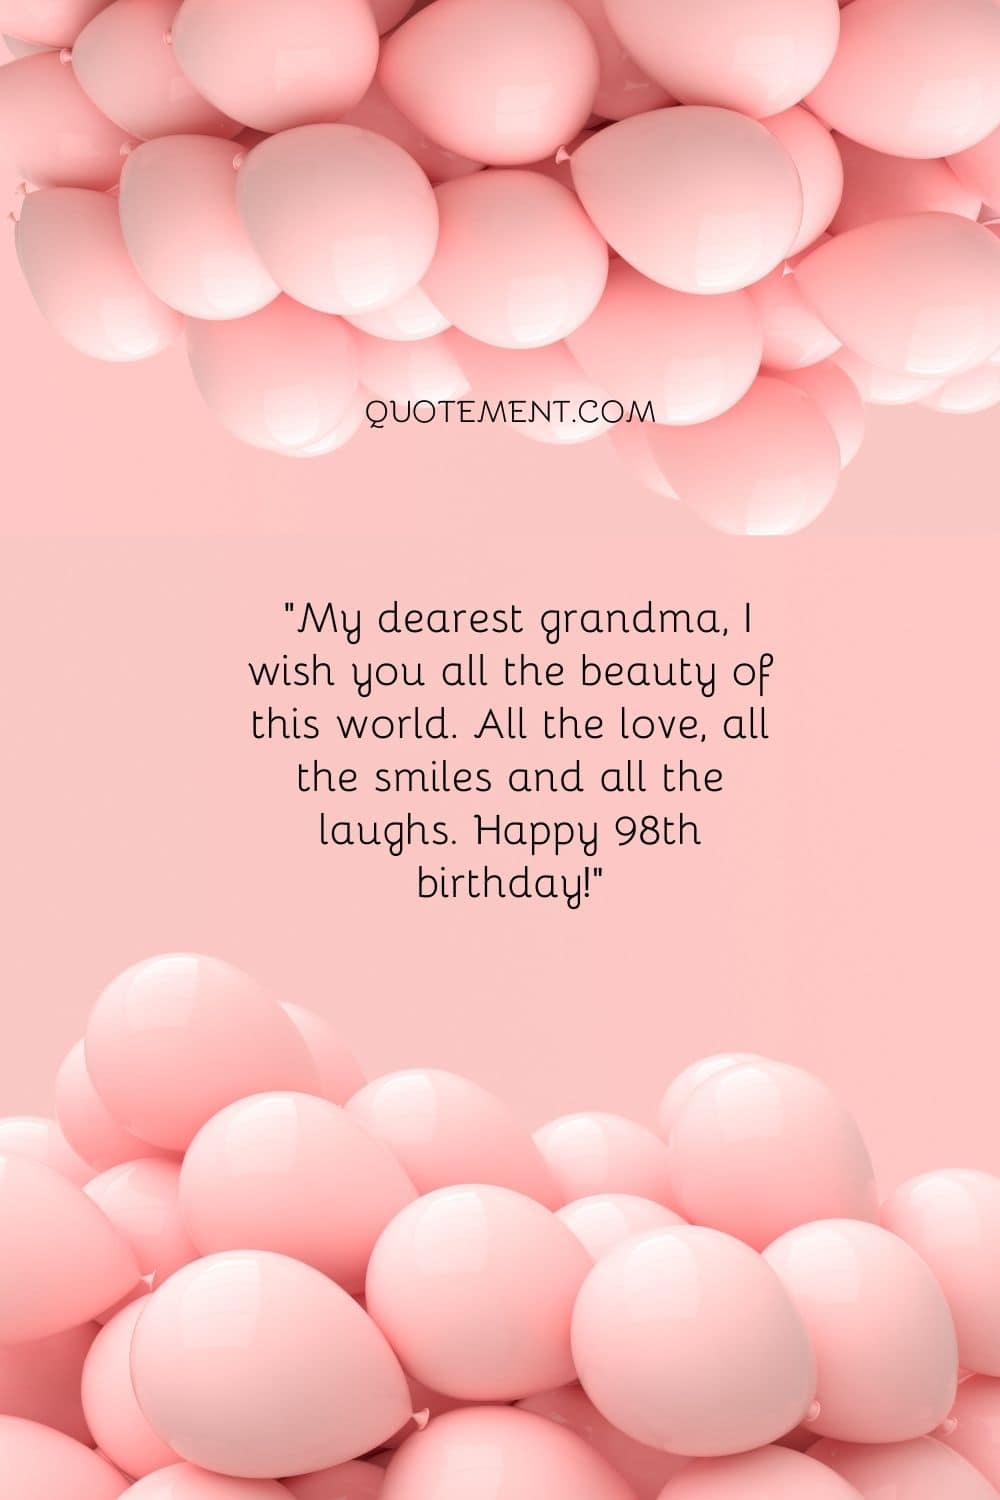 My dearest grandma, I wish you all the beauty of this world. All the love, all the smiles and all the laughs. Happy 98th birthday!